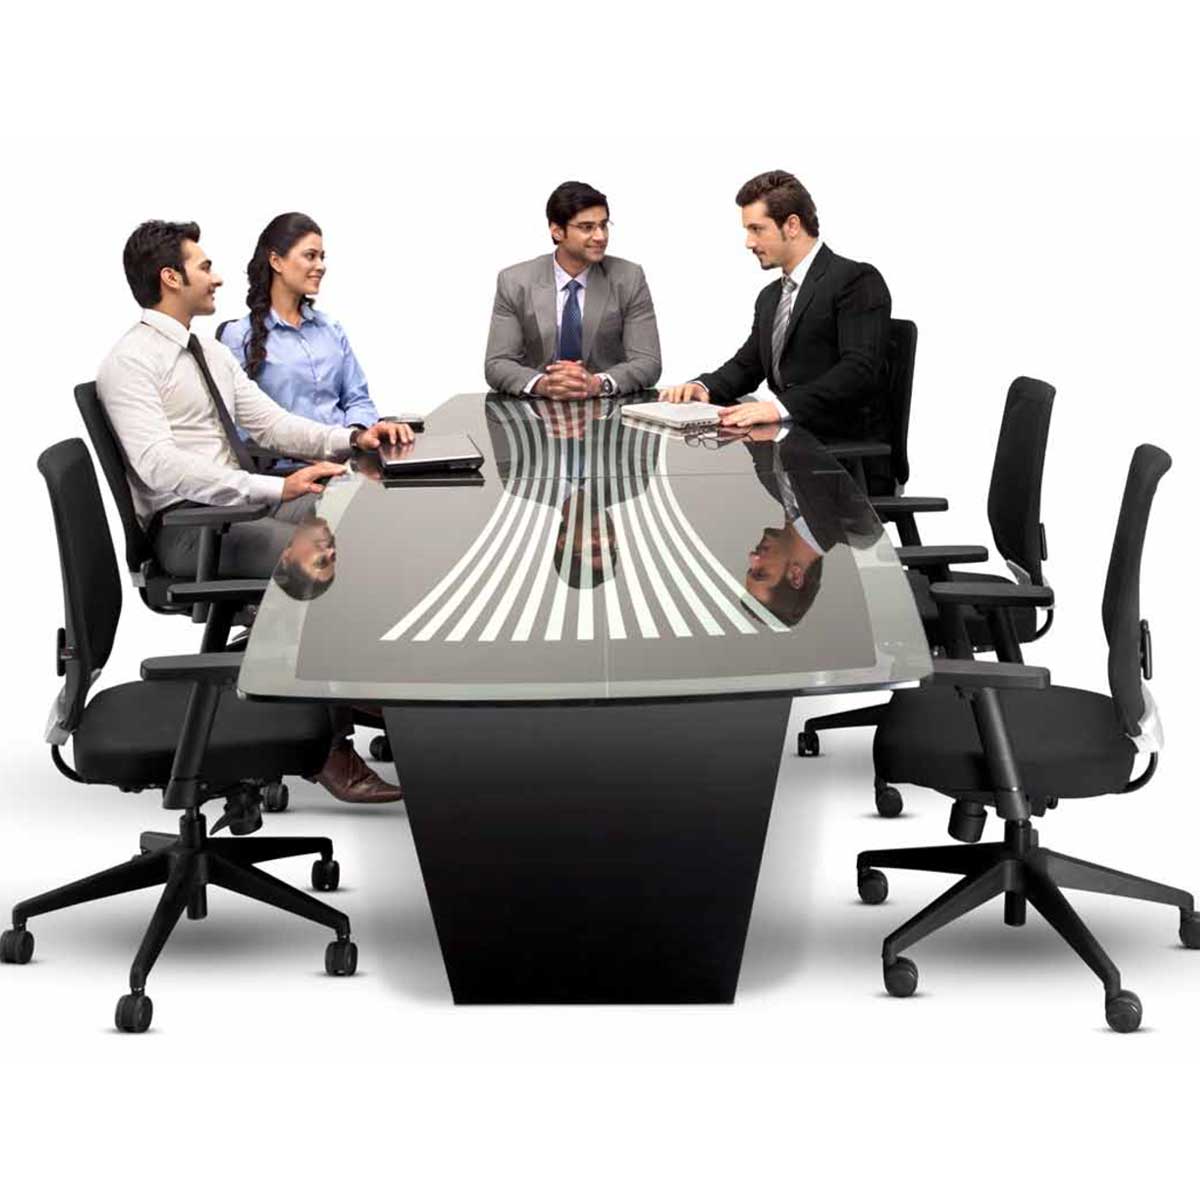 Conference table Manufacturers, Suppliers in Inderlok